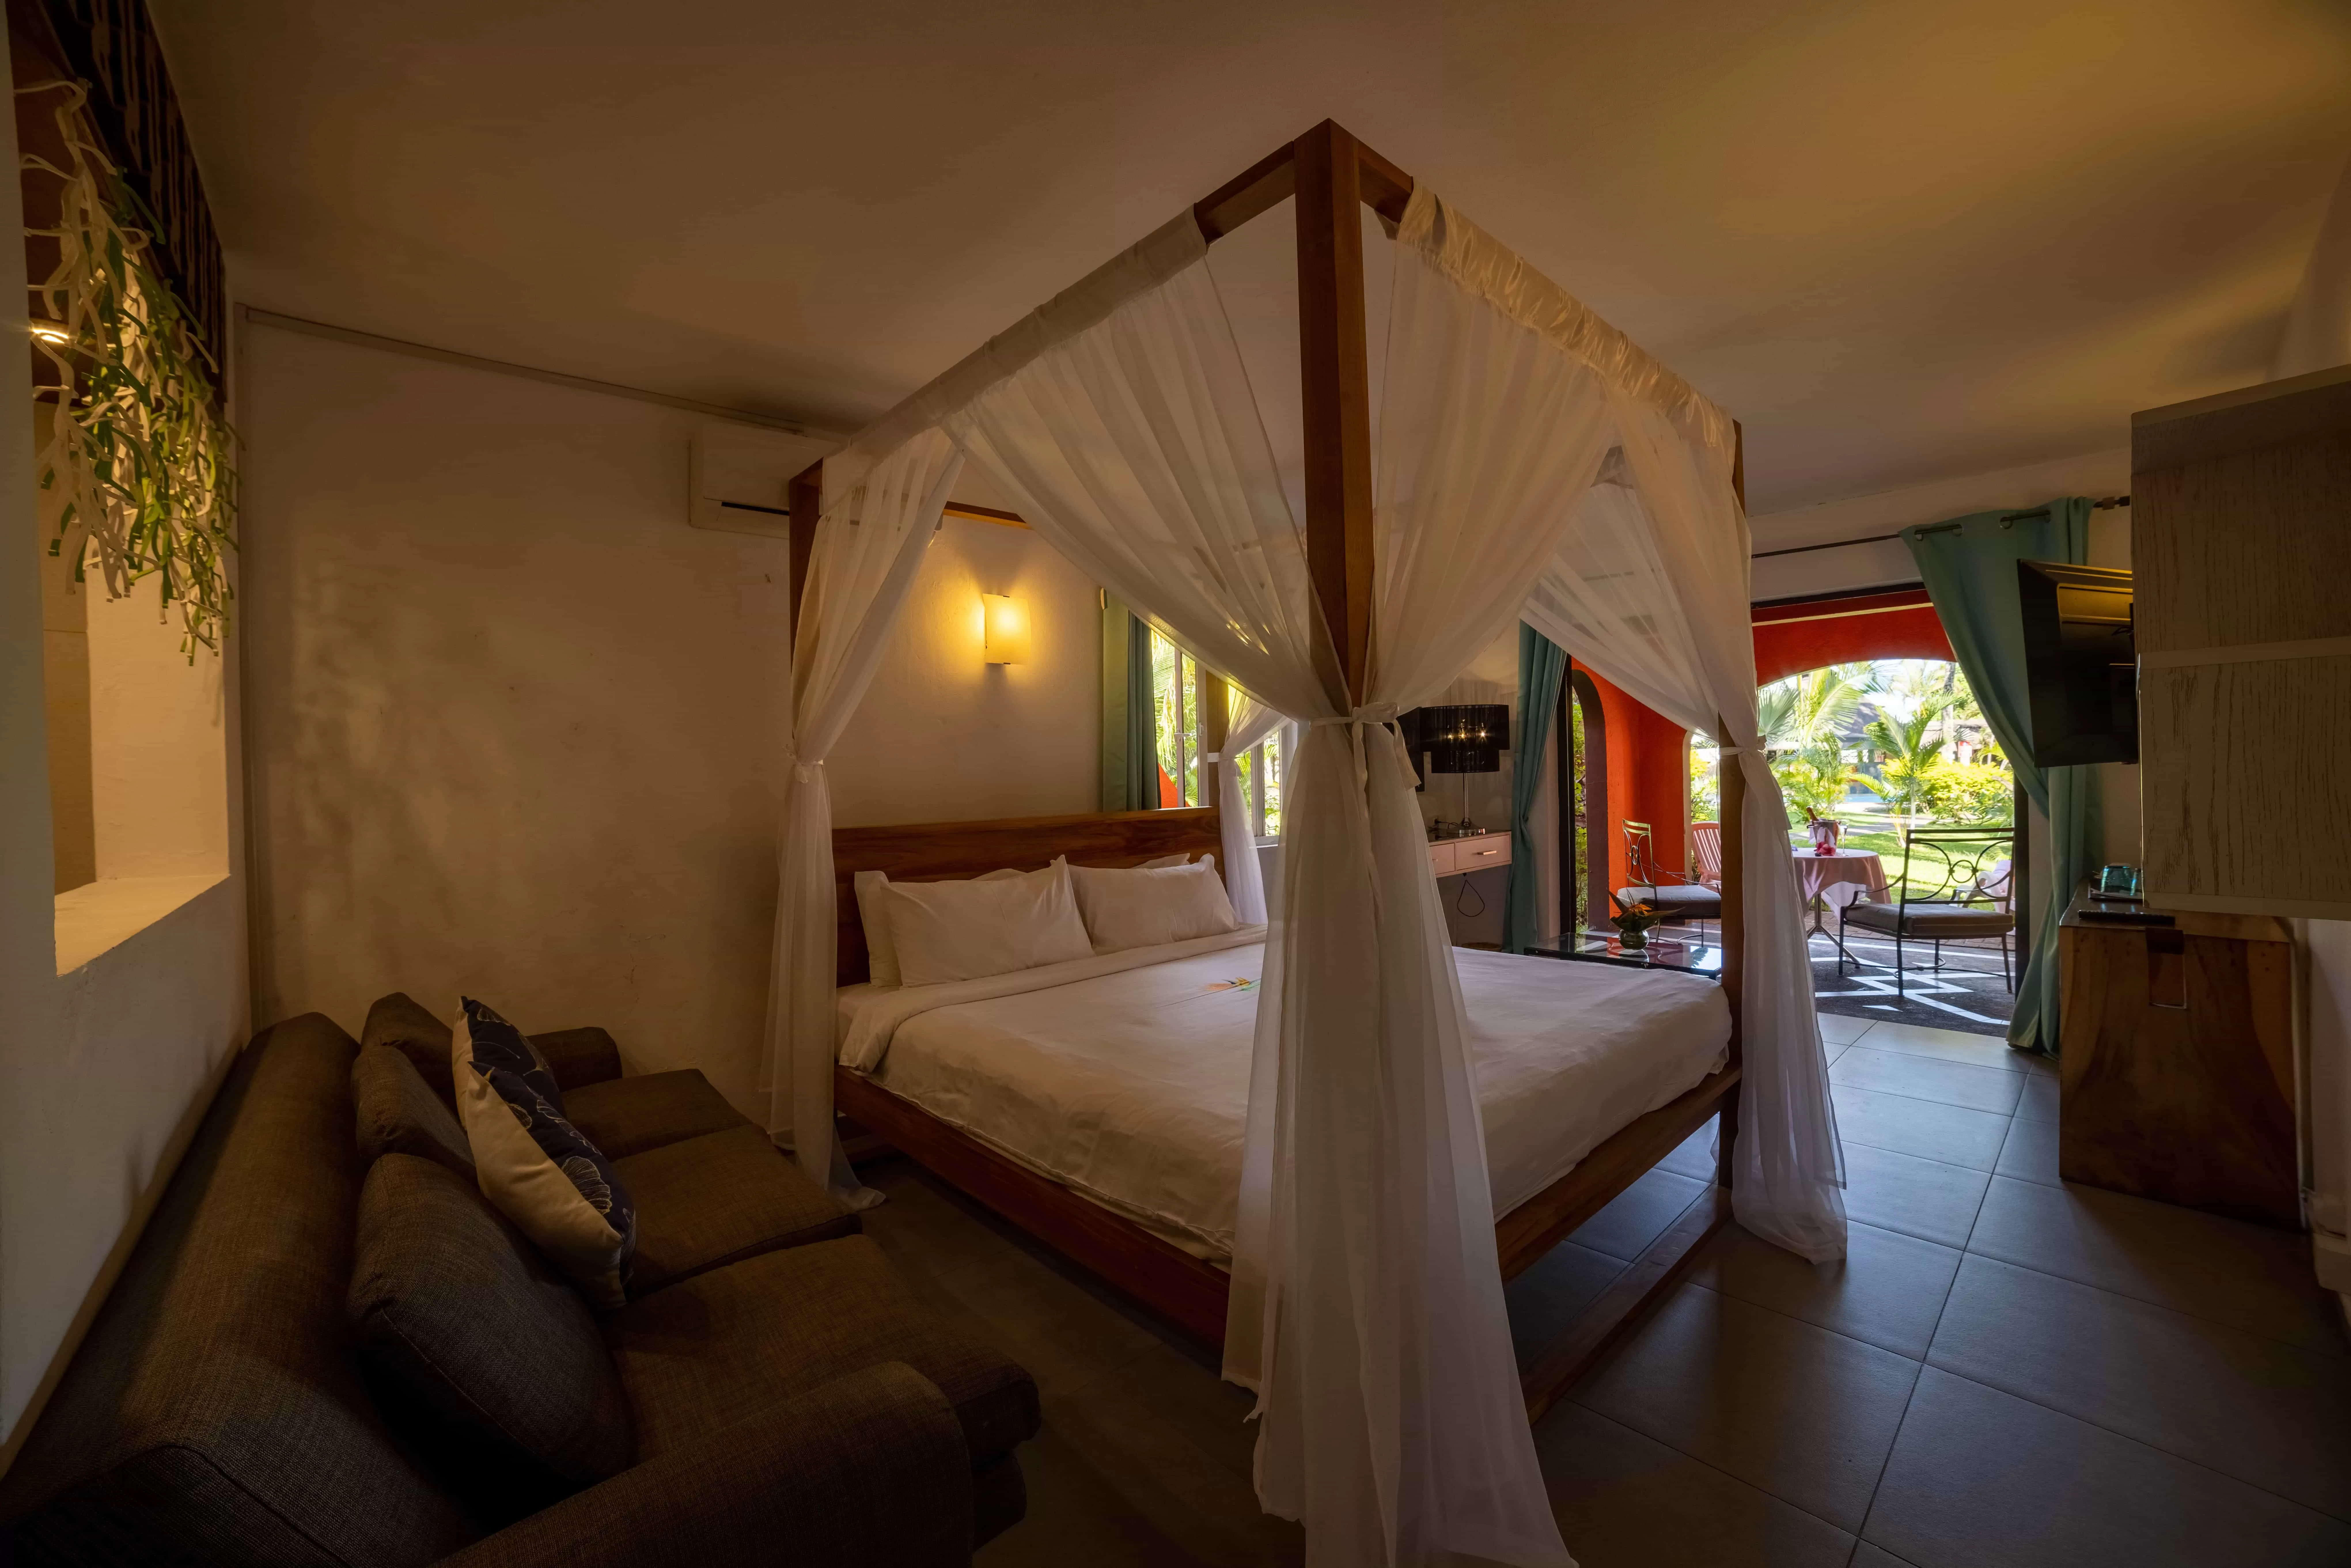 Flowers of Paradise Overnight Stay - Bedroom with Lagoon View